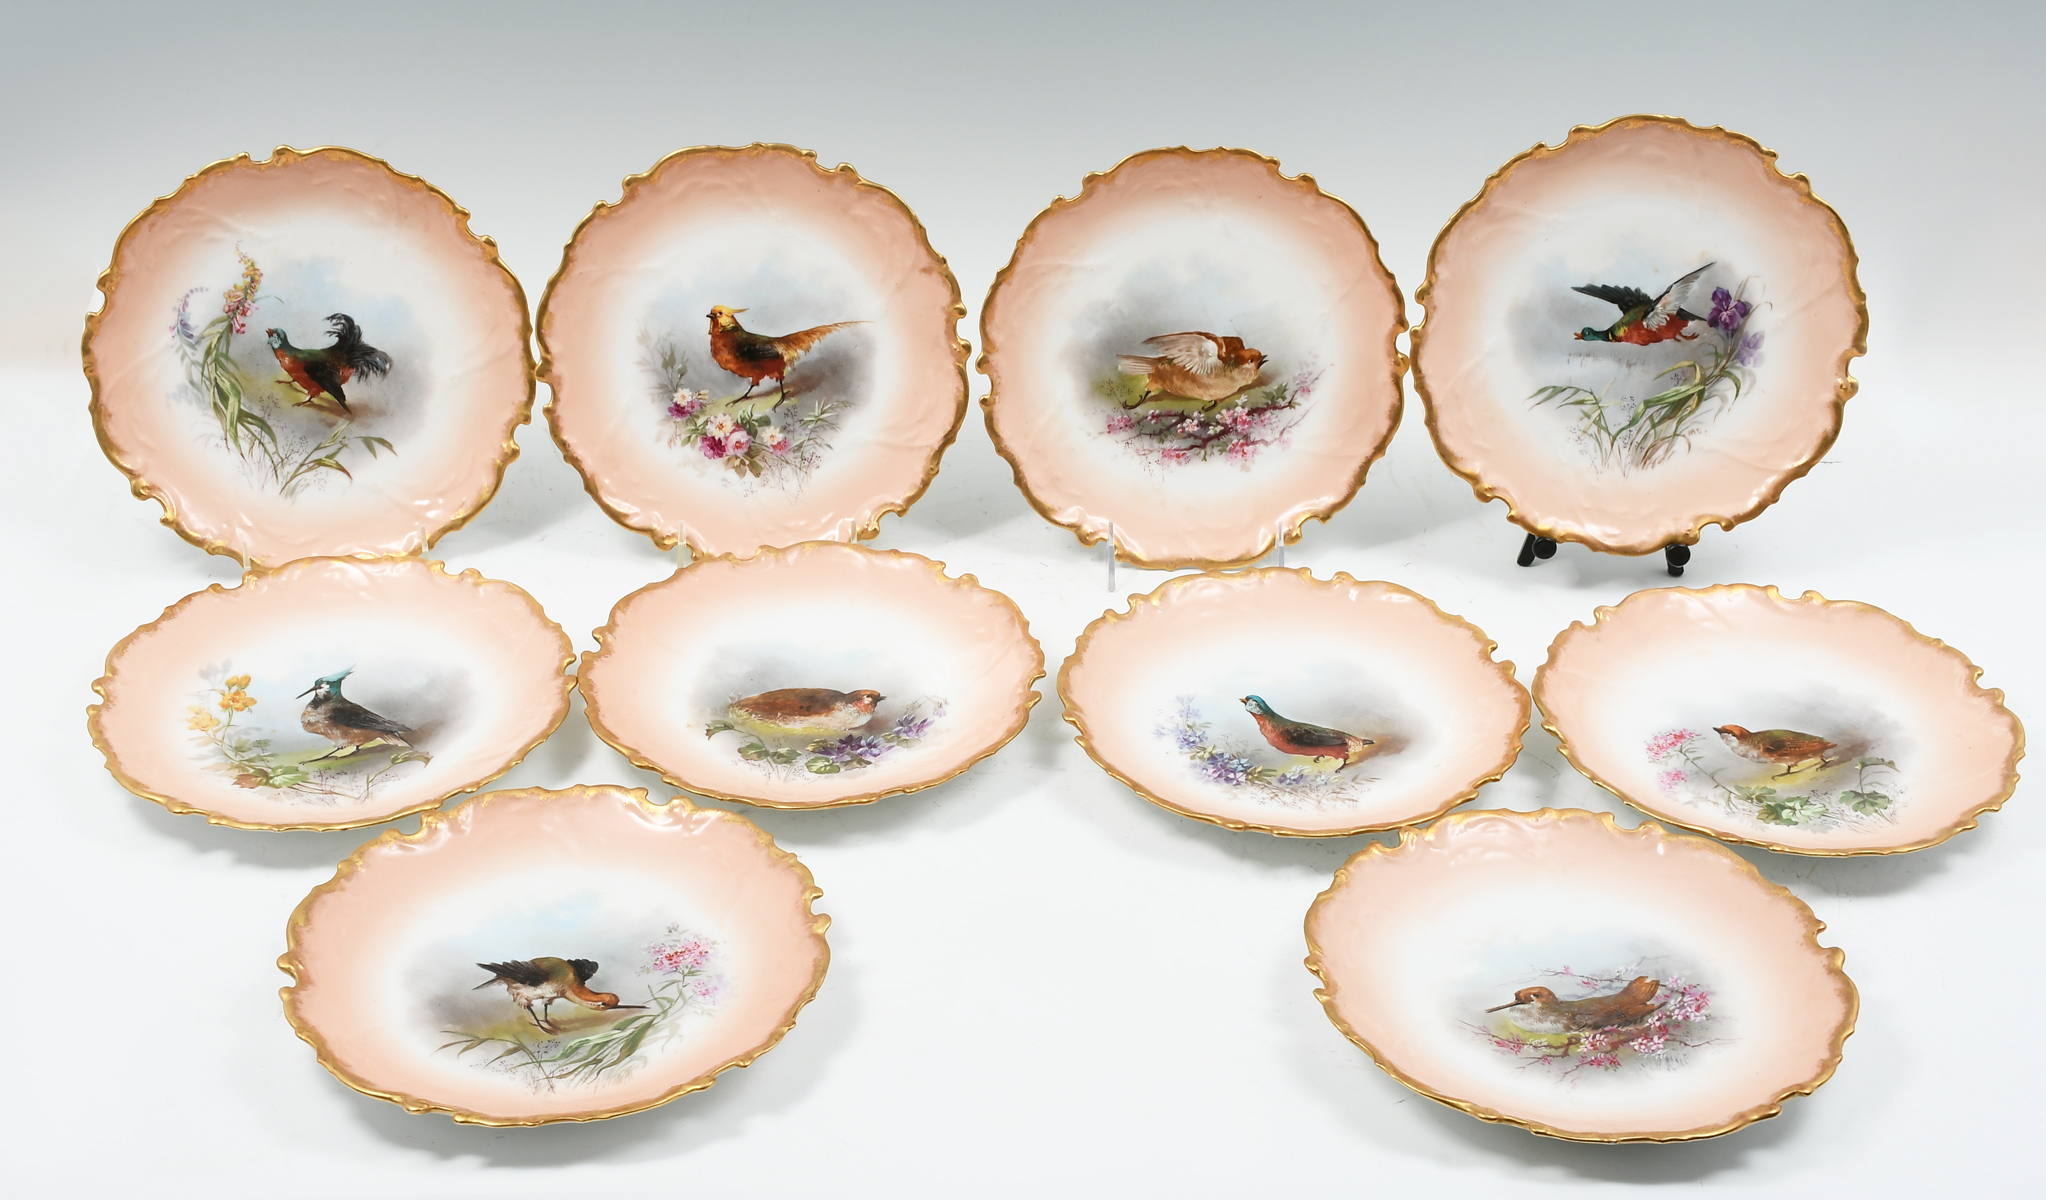 10 PC. HAND-PAINTED LIMOGES PORCELAIN